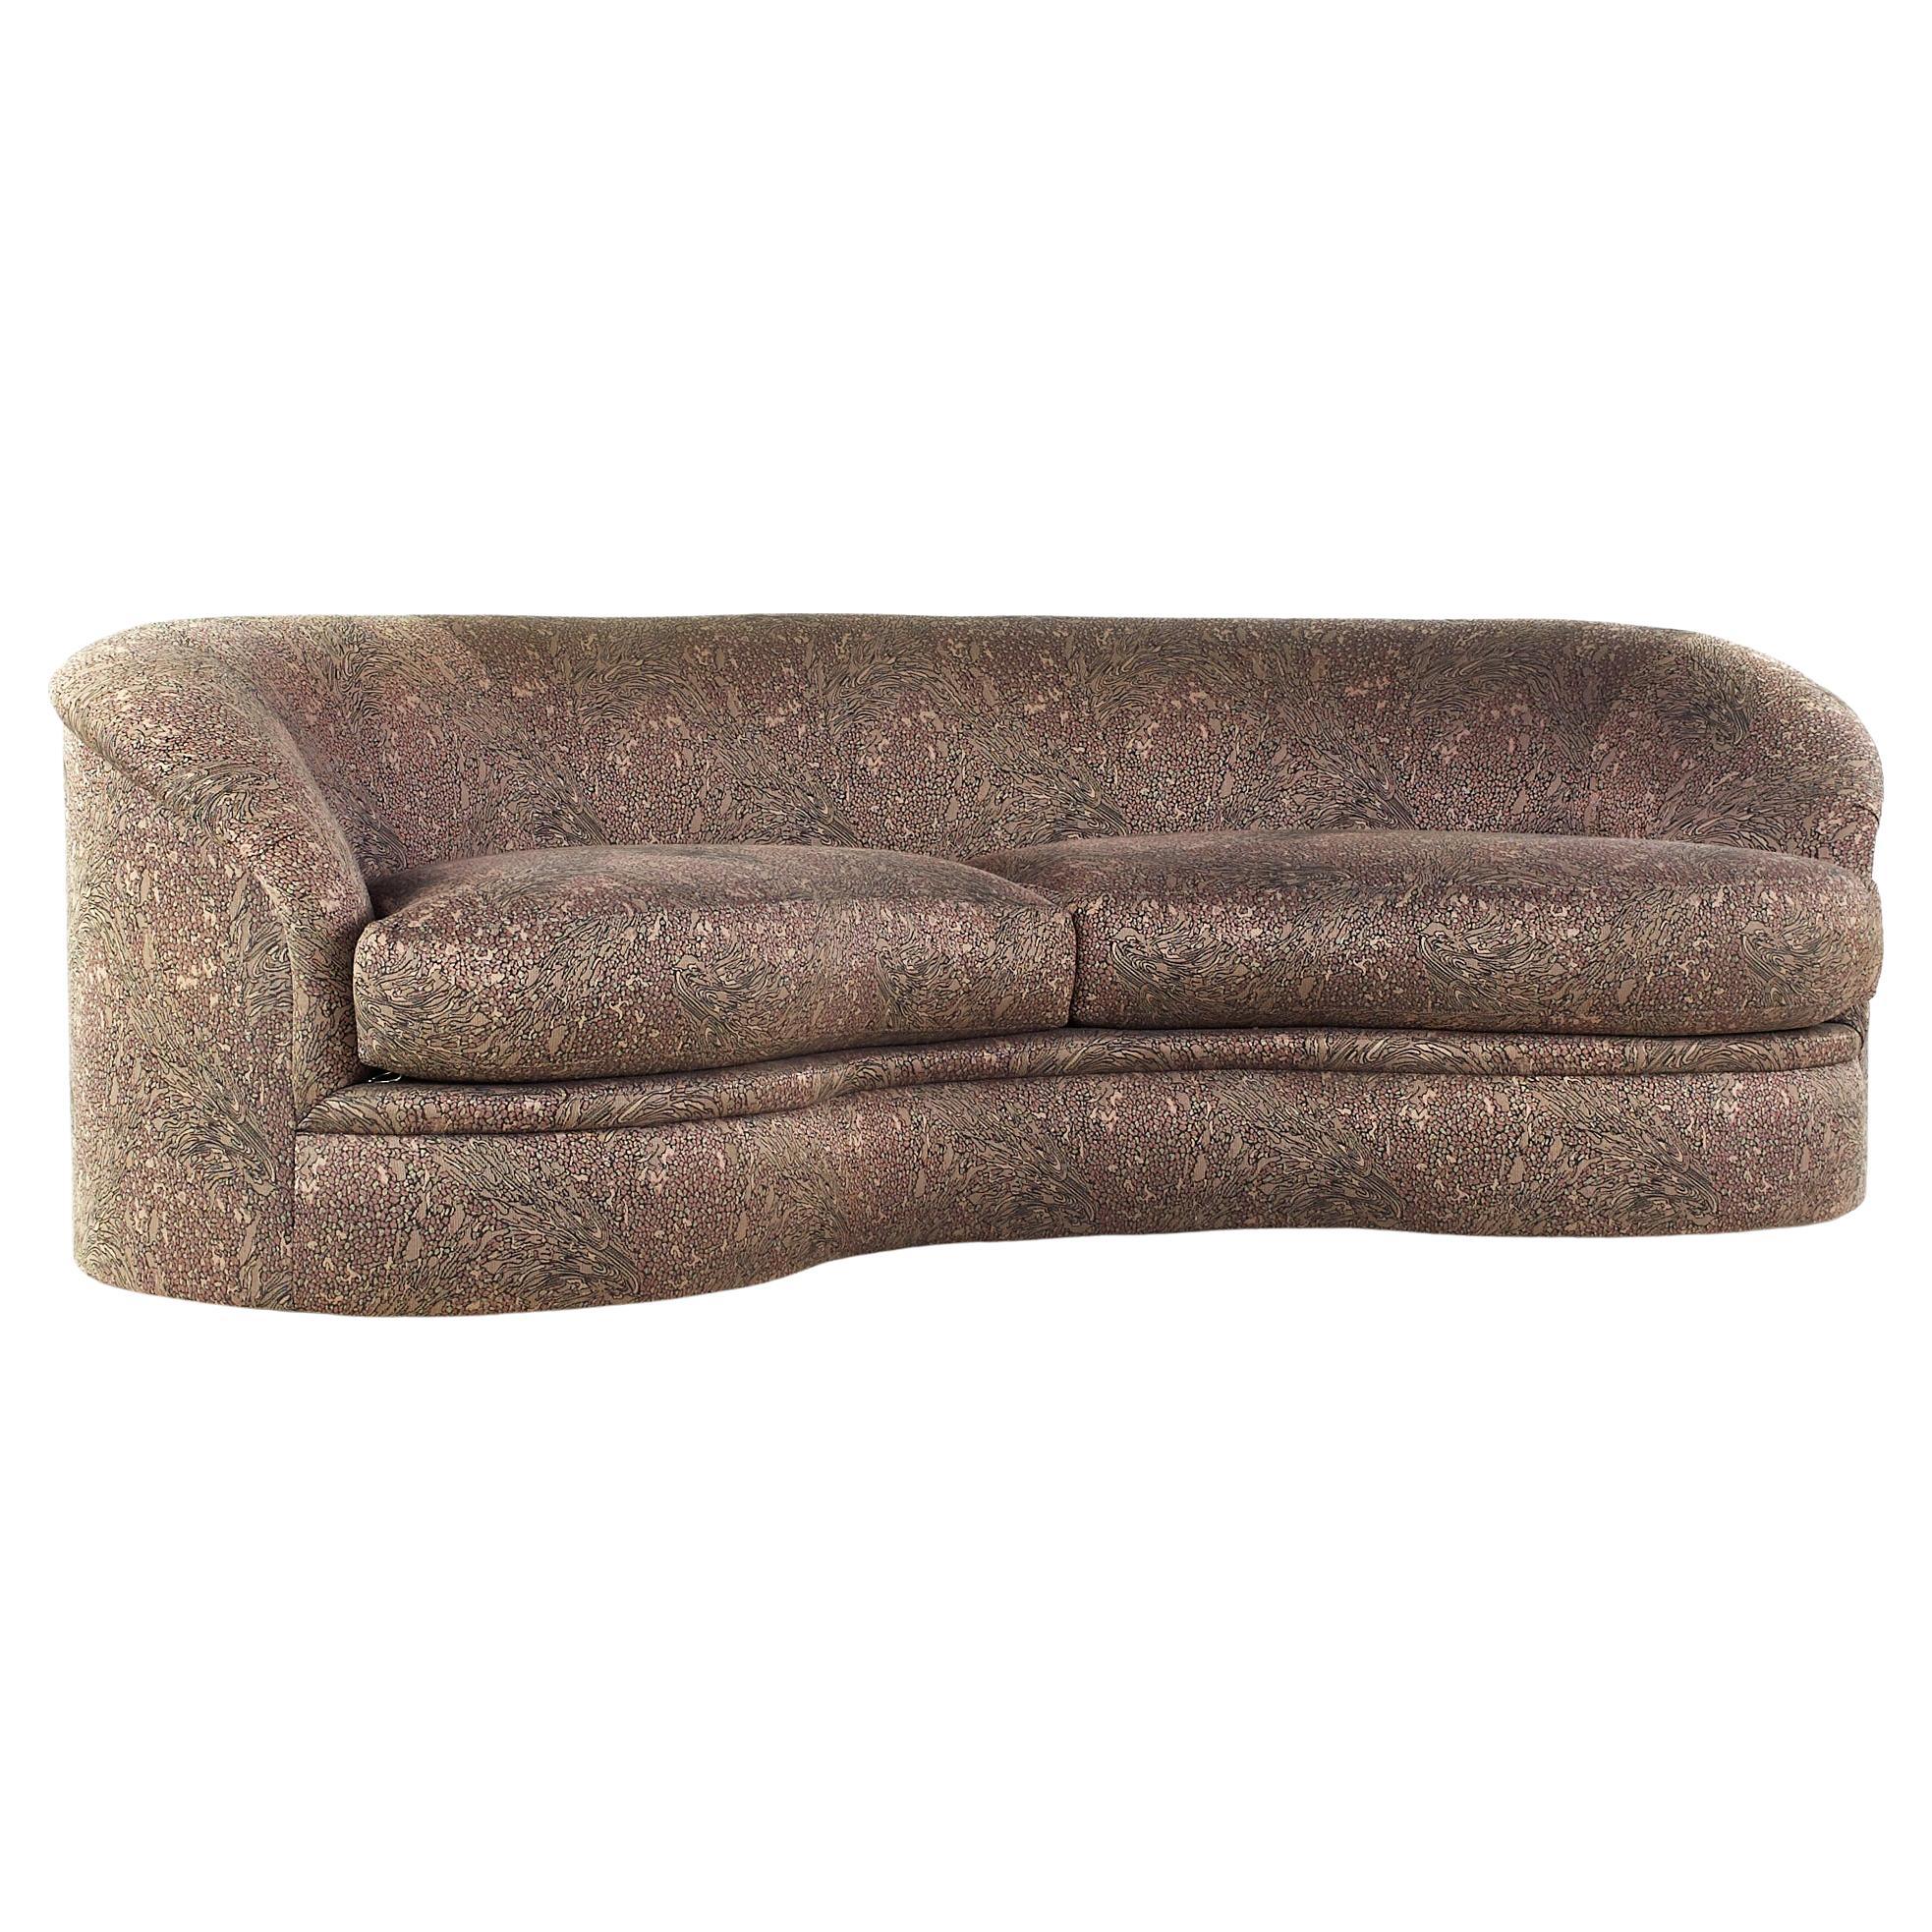 Kagan for Directional Mid Century Kidney Sofa For Sale